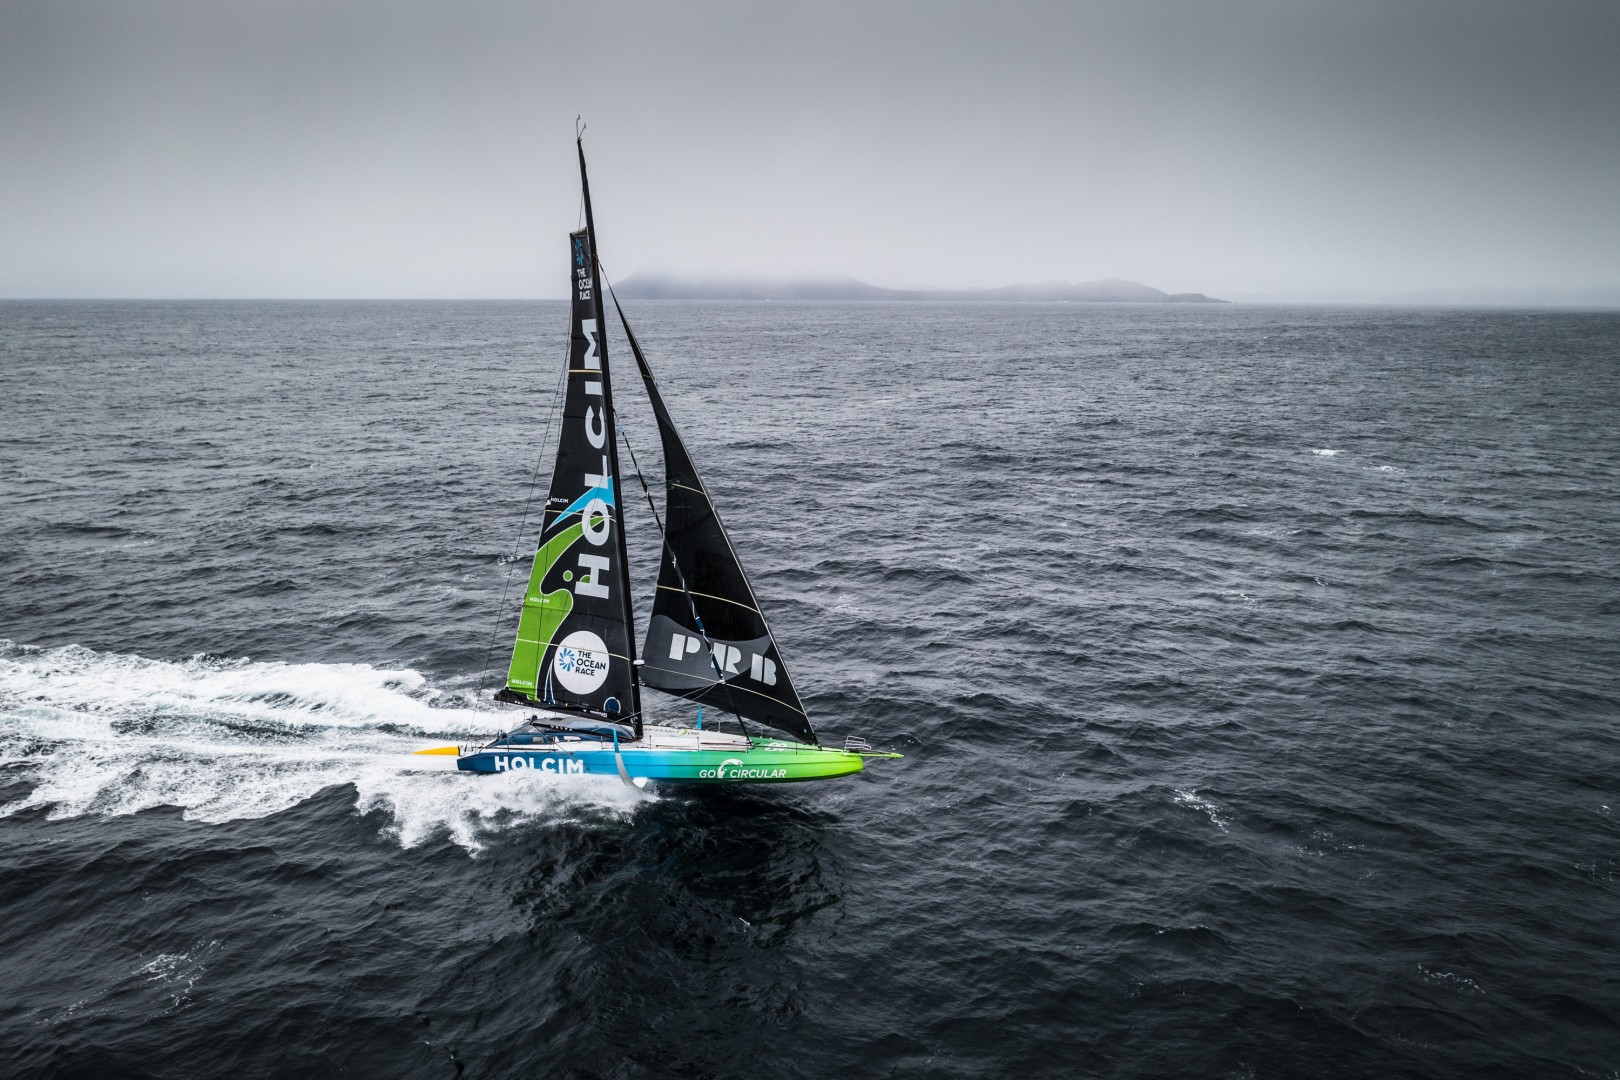 The Ocean Race 2022-23 - 28 March 2023, Leg 3 Day 29 onboard Team Holcim - PRB. Drone view, Cape Horn in the background.
© Julien Champolion | polaRYSE / Holcim - PRB / The Ocean Race